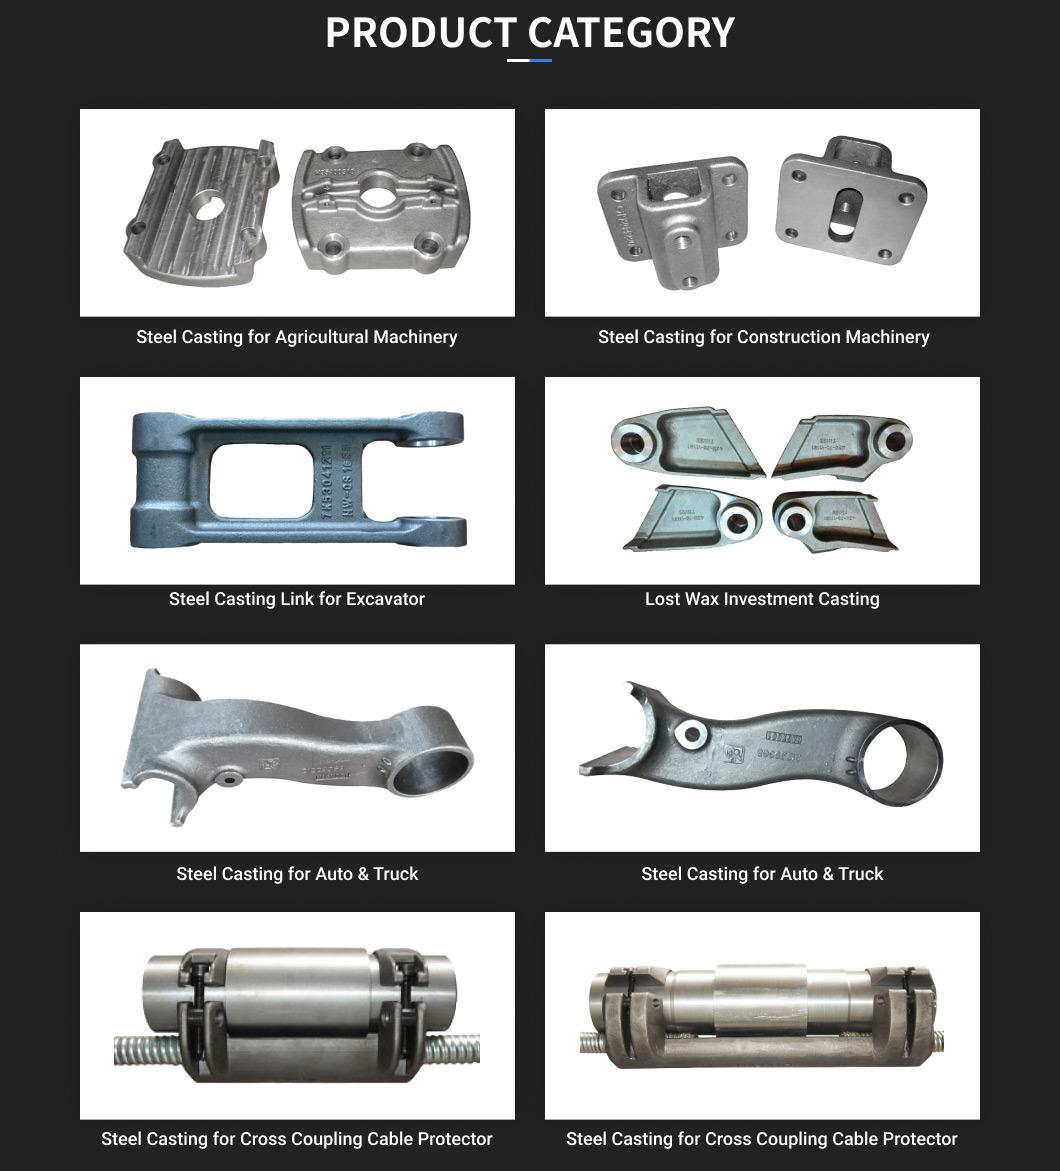 Hot Sale Cheap Prototype Casting Machining Parts for Agriculural Machinery Parts